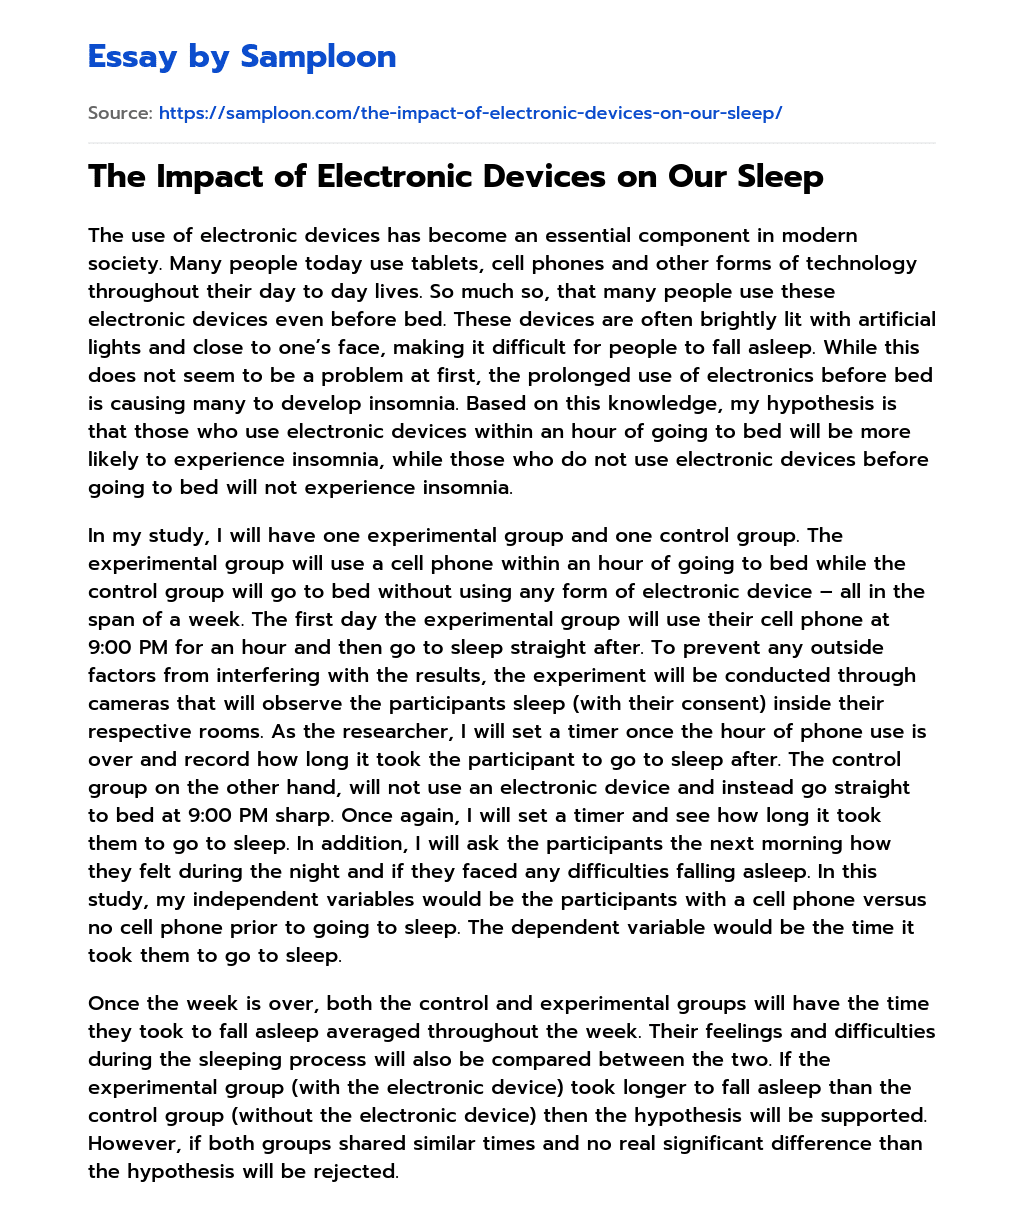 The Impact of Electronic Devices on Our Sleep essay